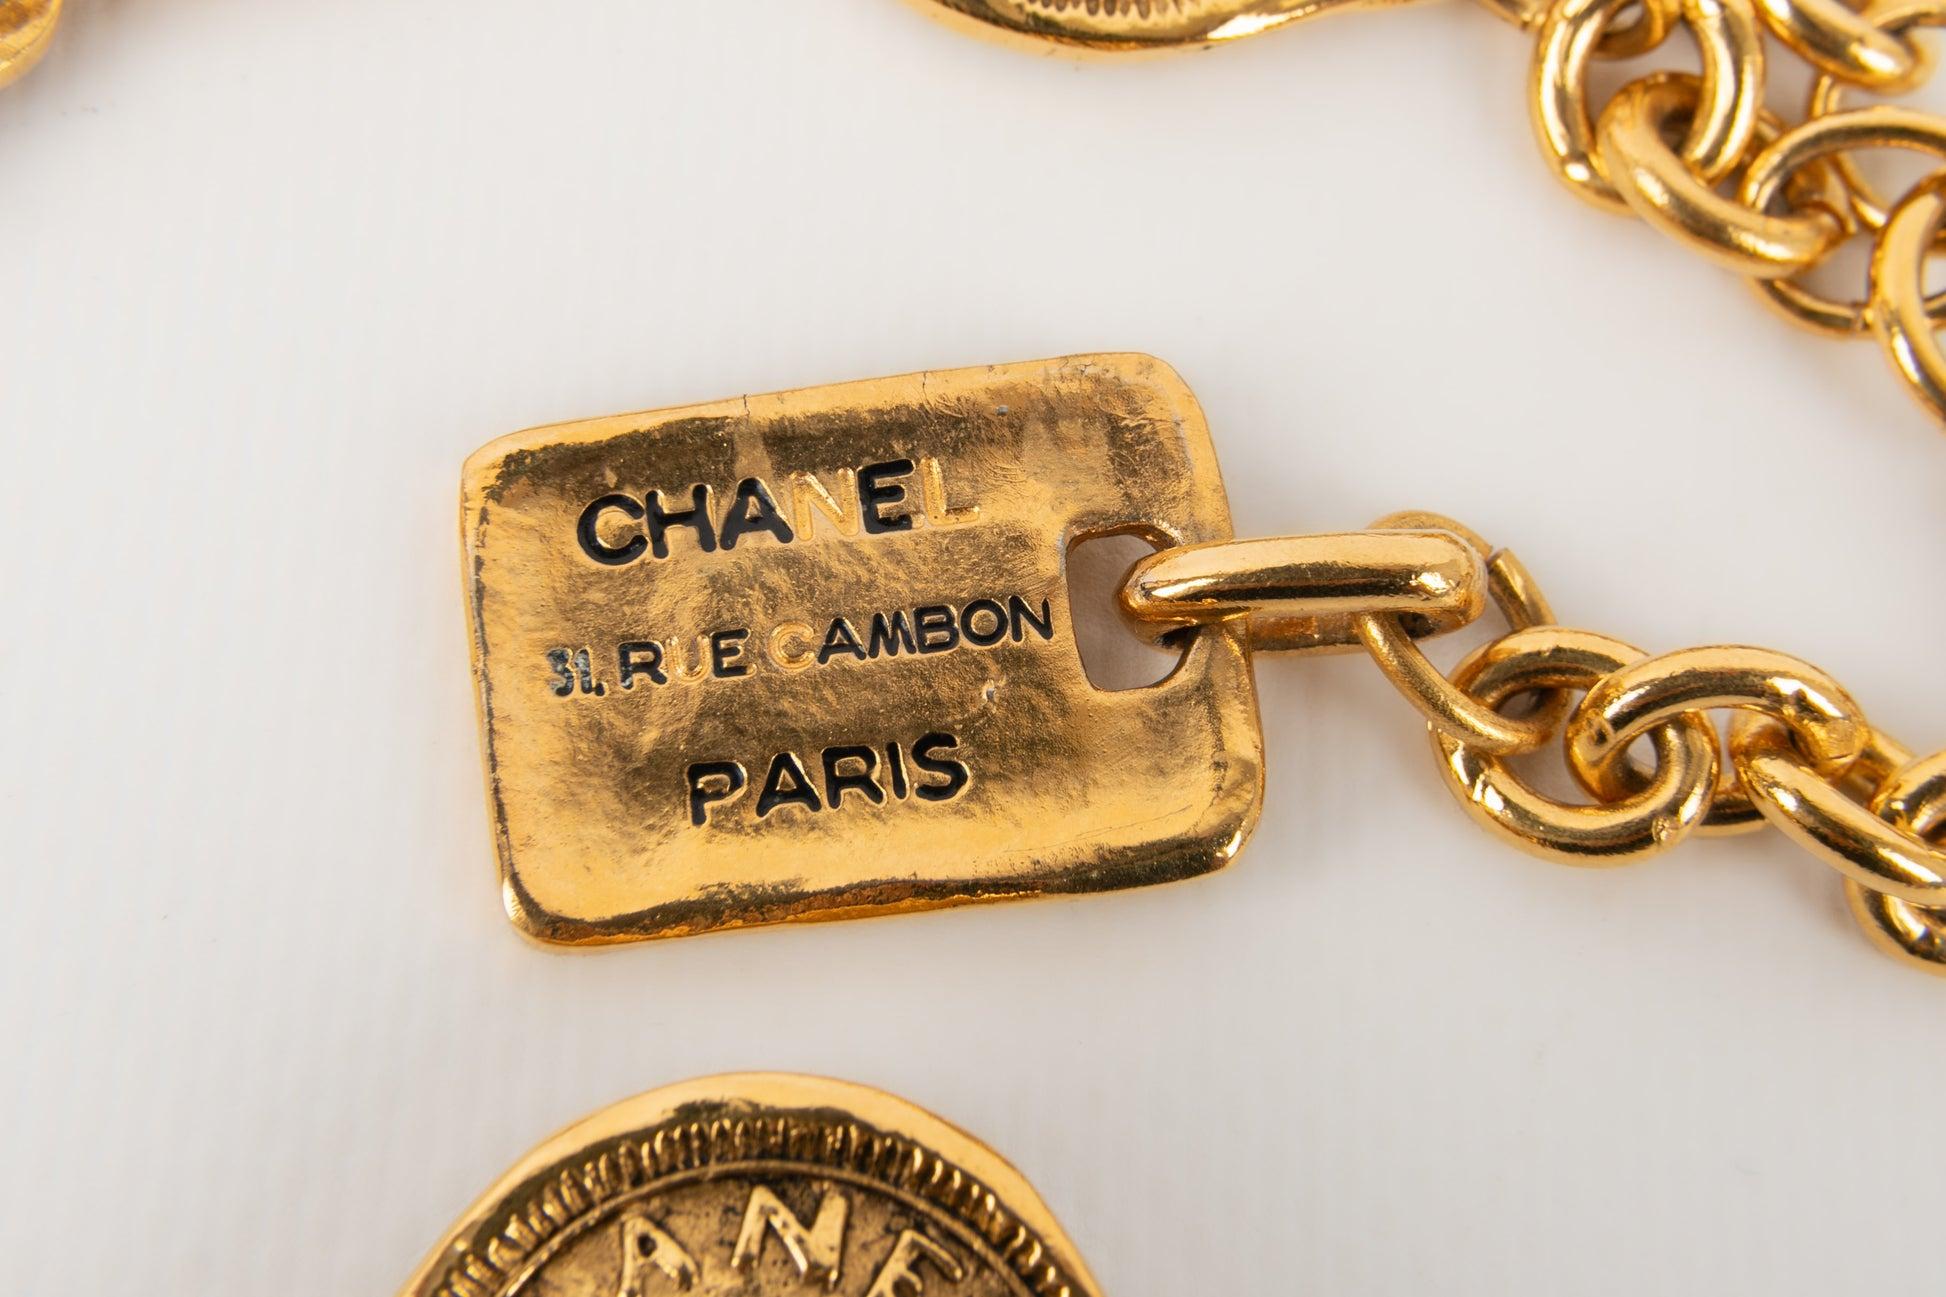 Chanel Short Necklace in Golden Metal with 